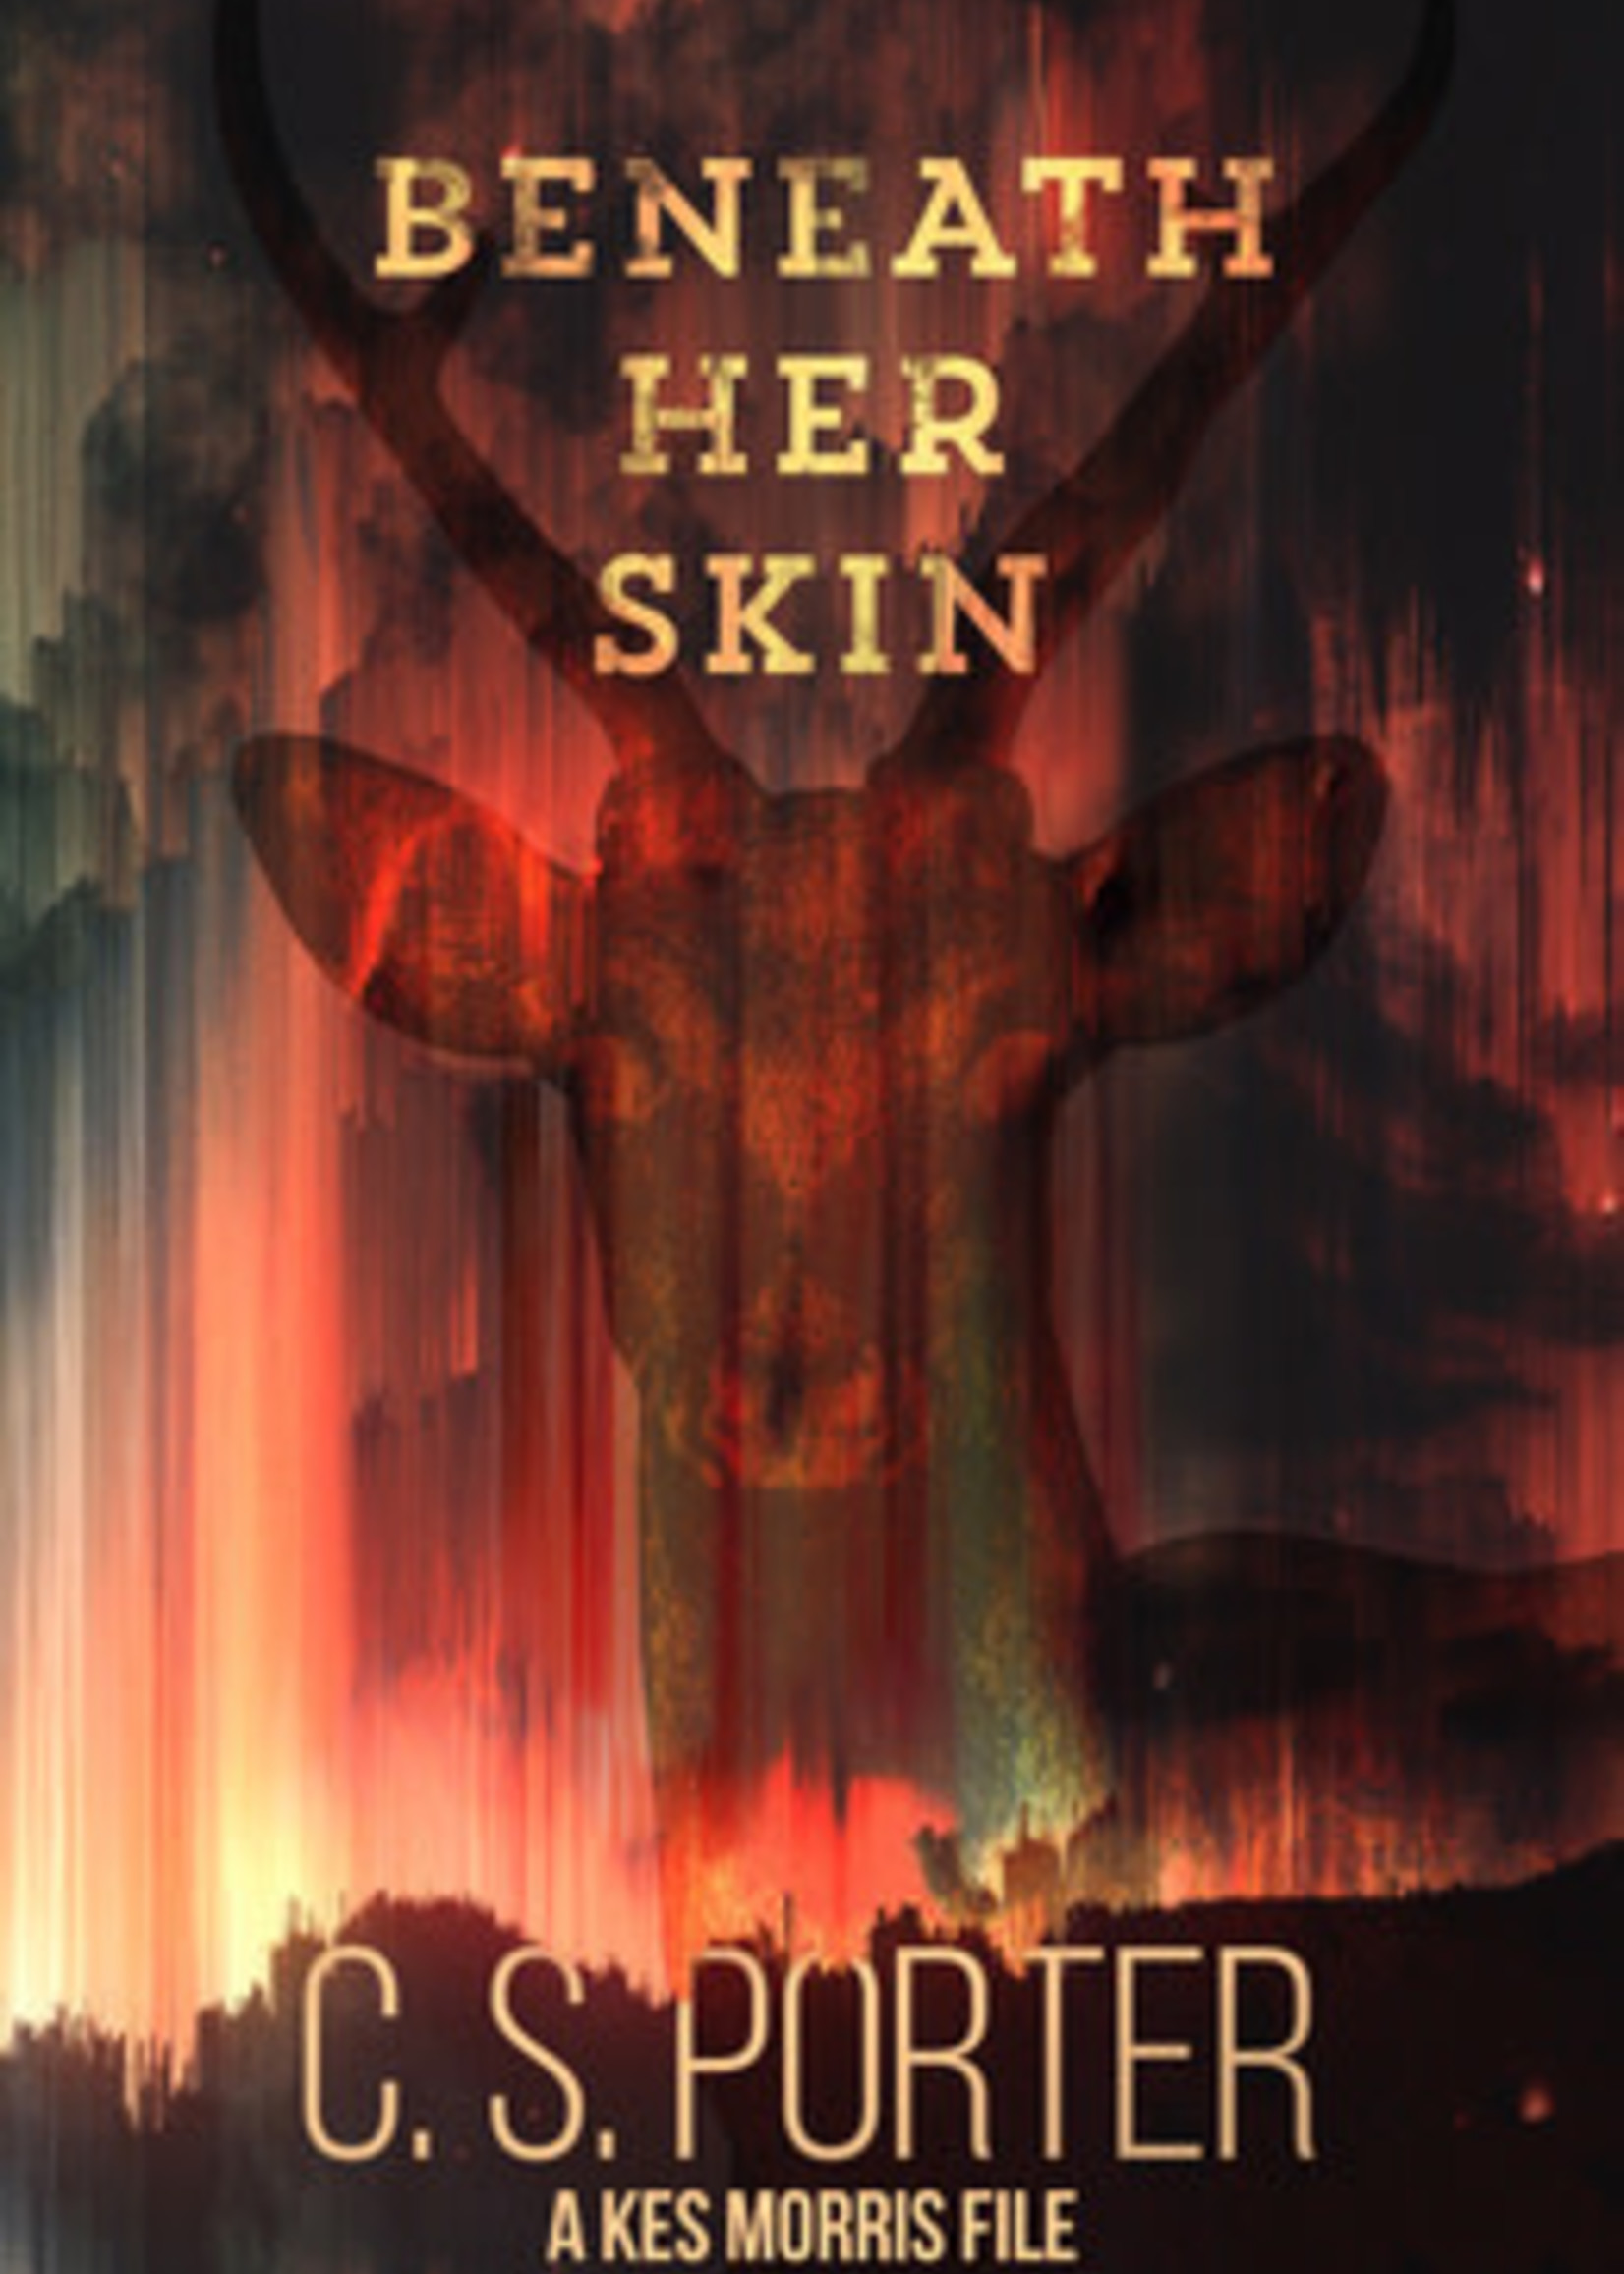 Beneath Her Skin: A Kes Morris File by C.S. Porter